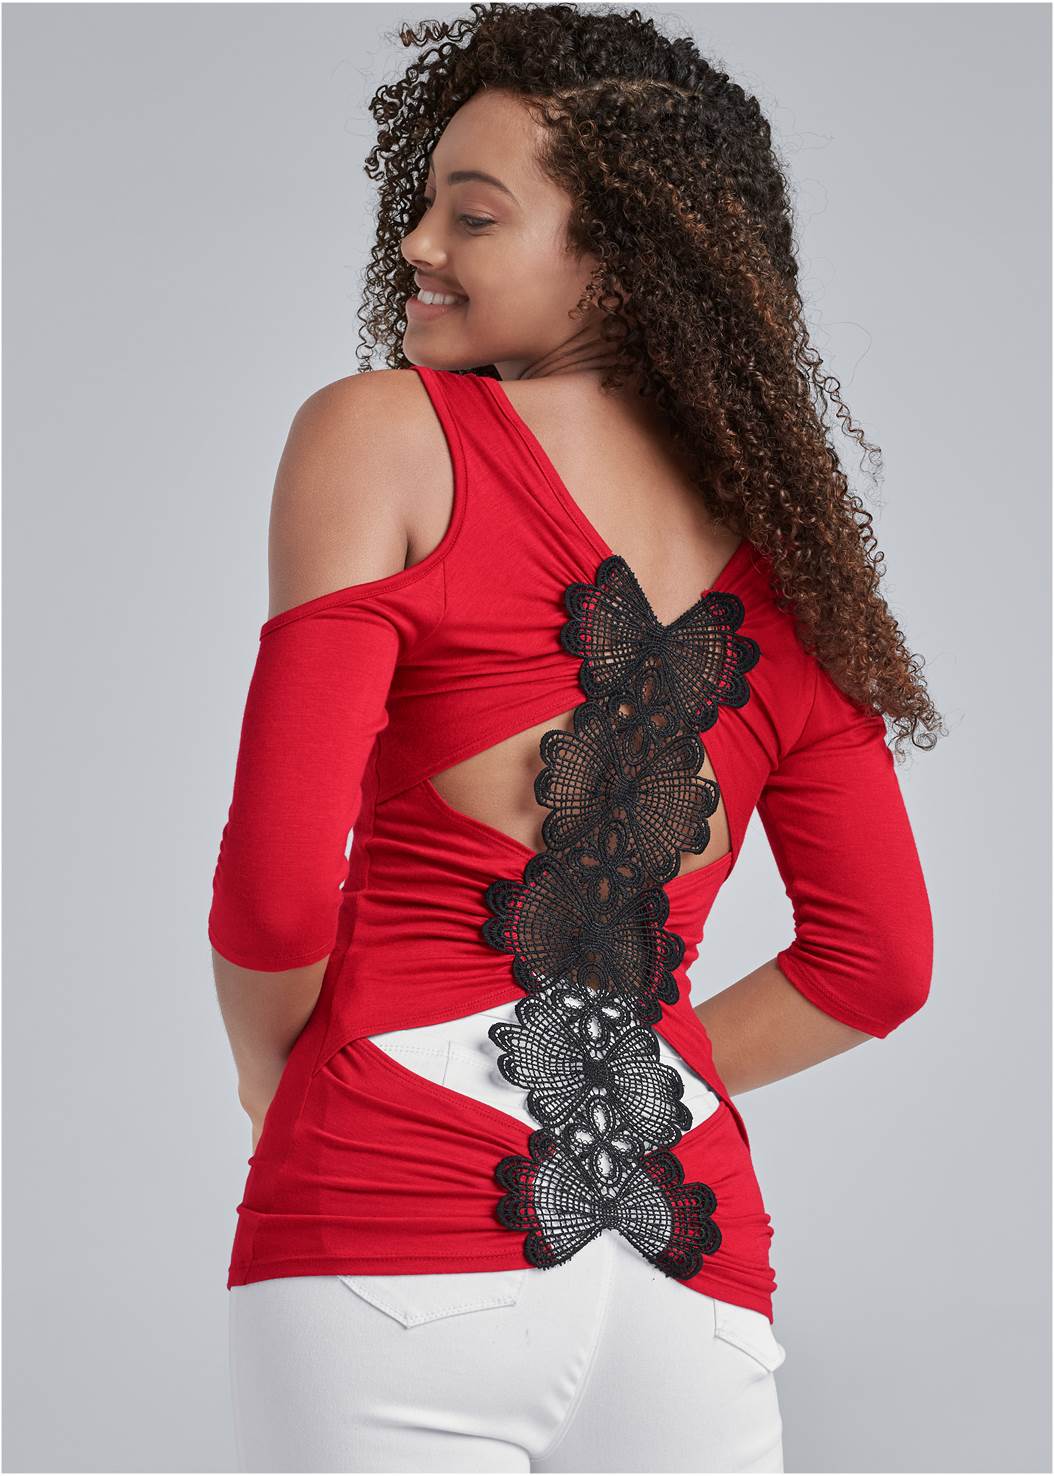 lace-cut-out-back-top-in-red-black-venus